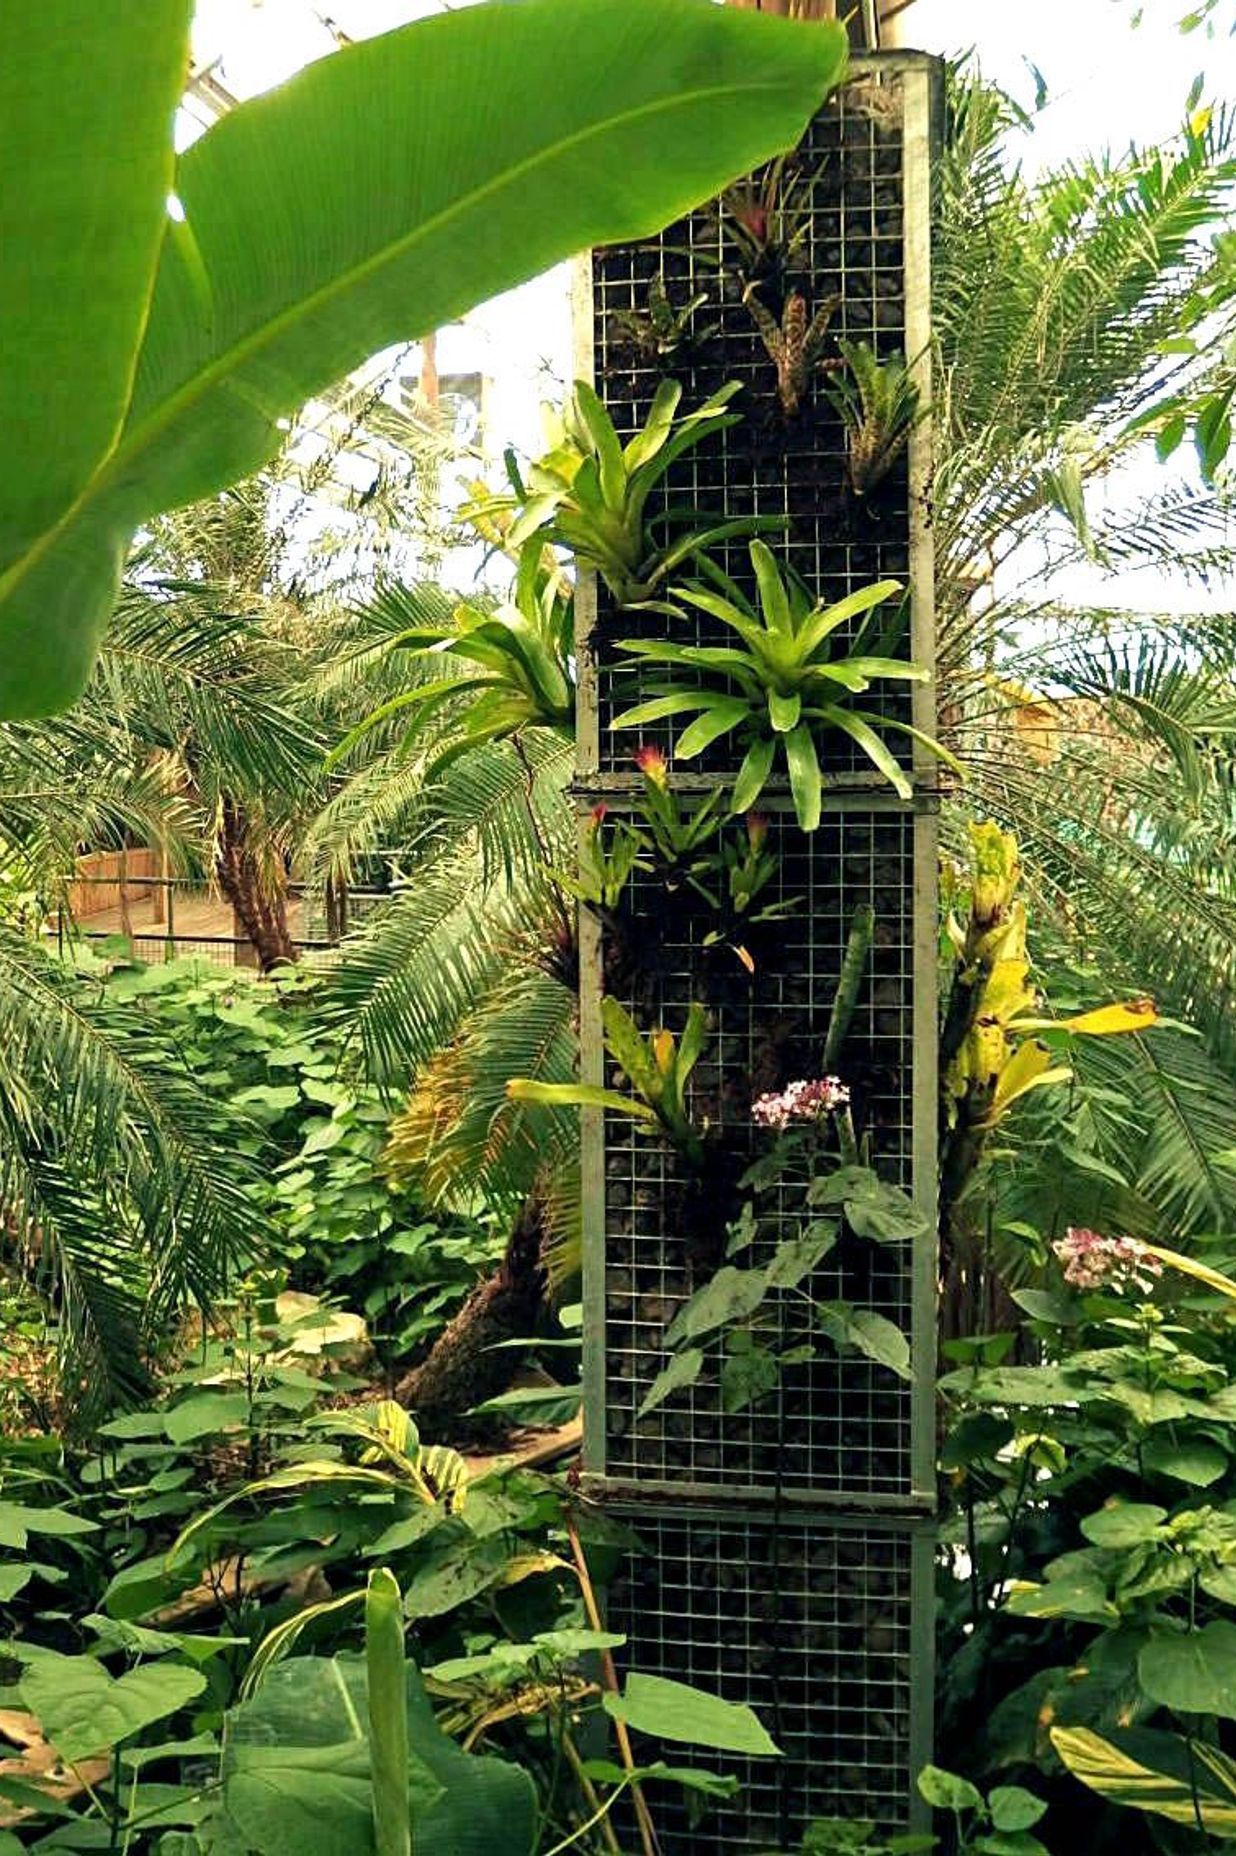 Tropical bromeliads are well suited to the hot and humid atmosphere within the house